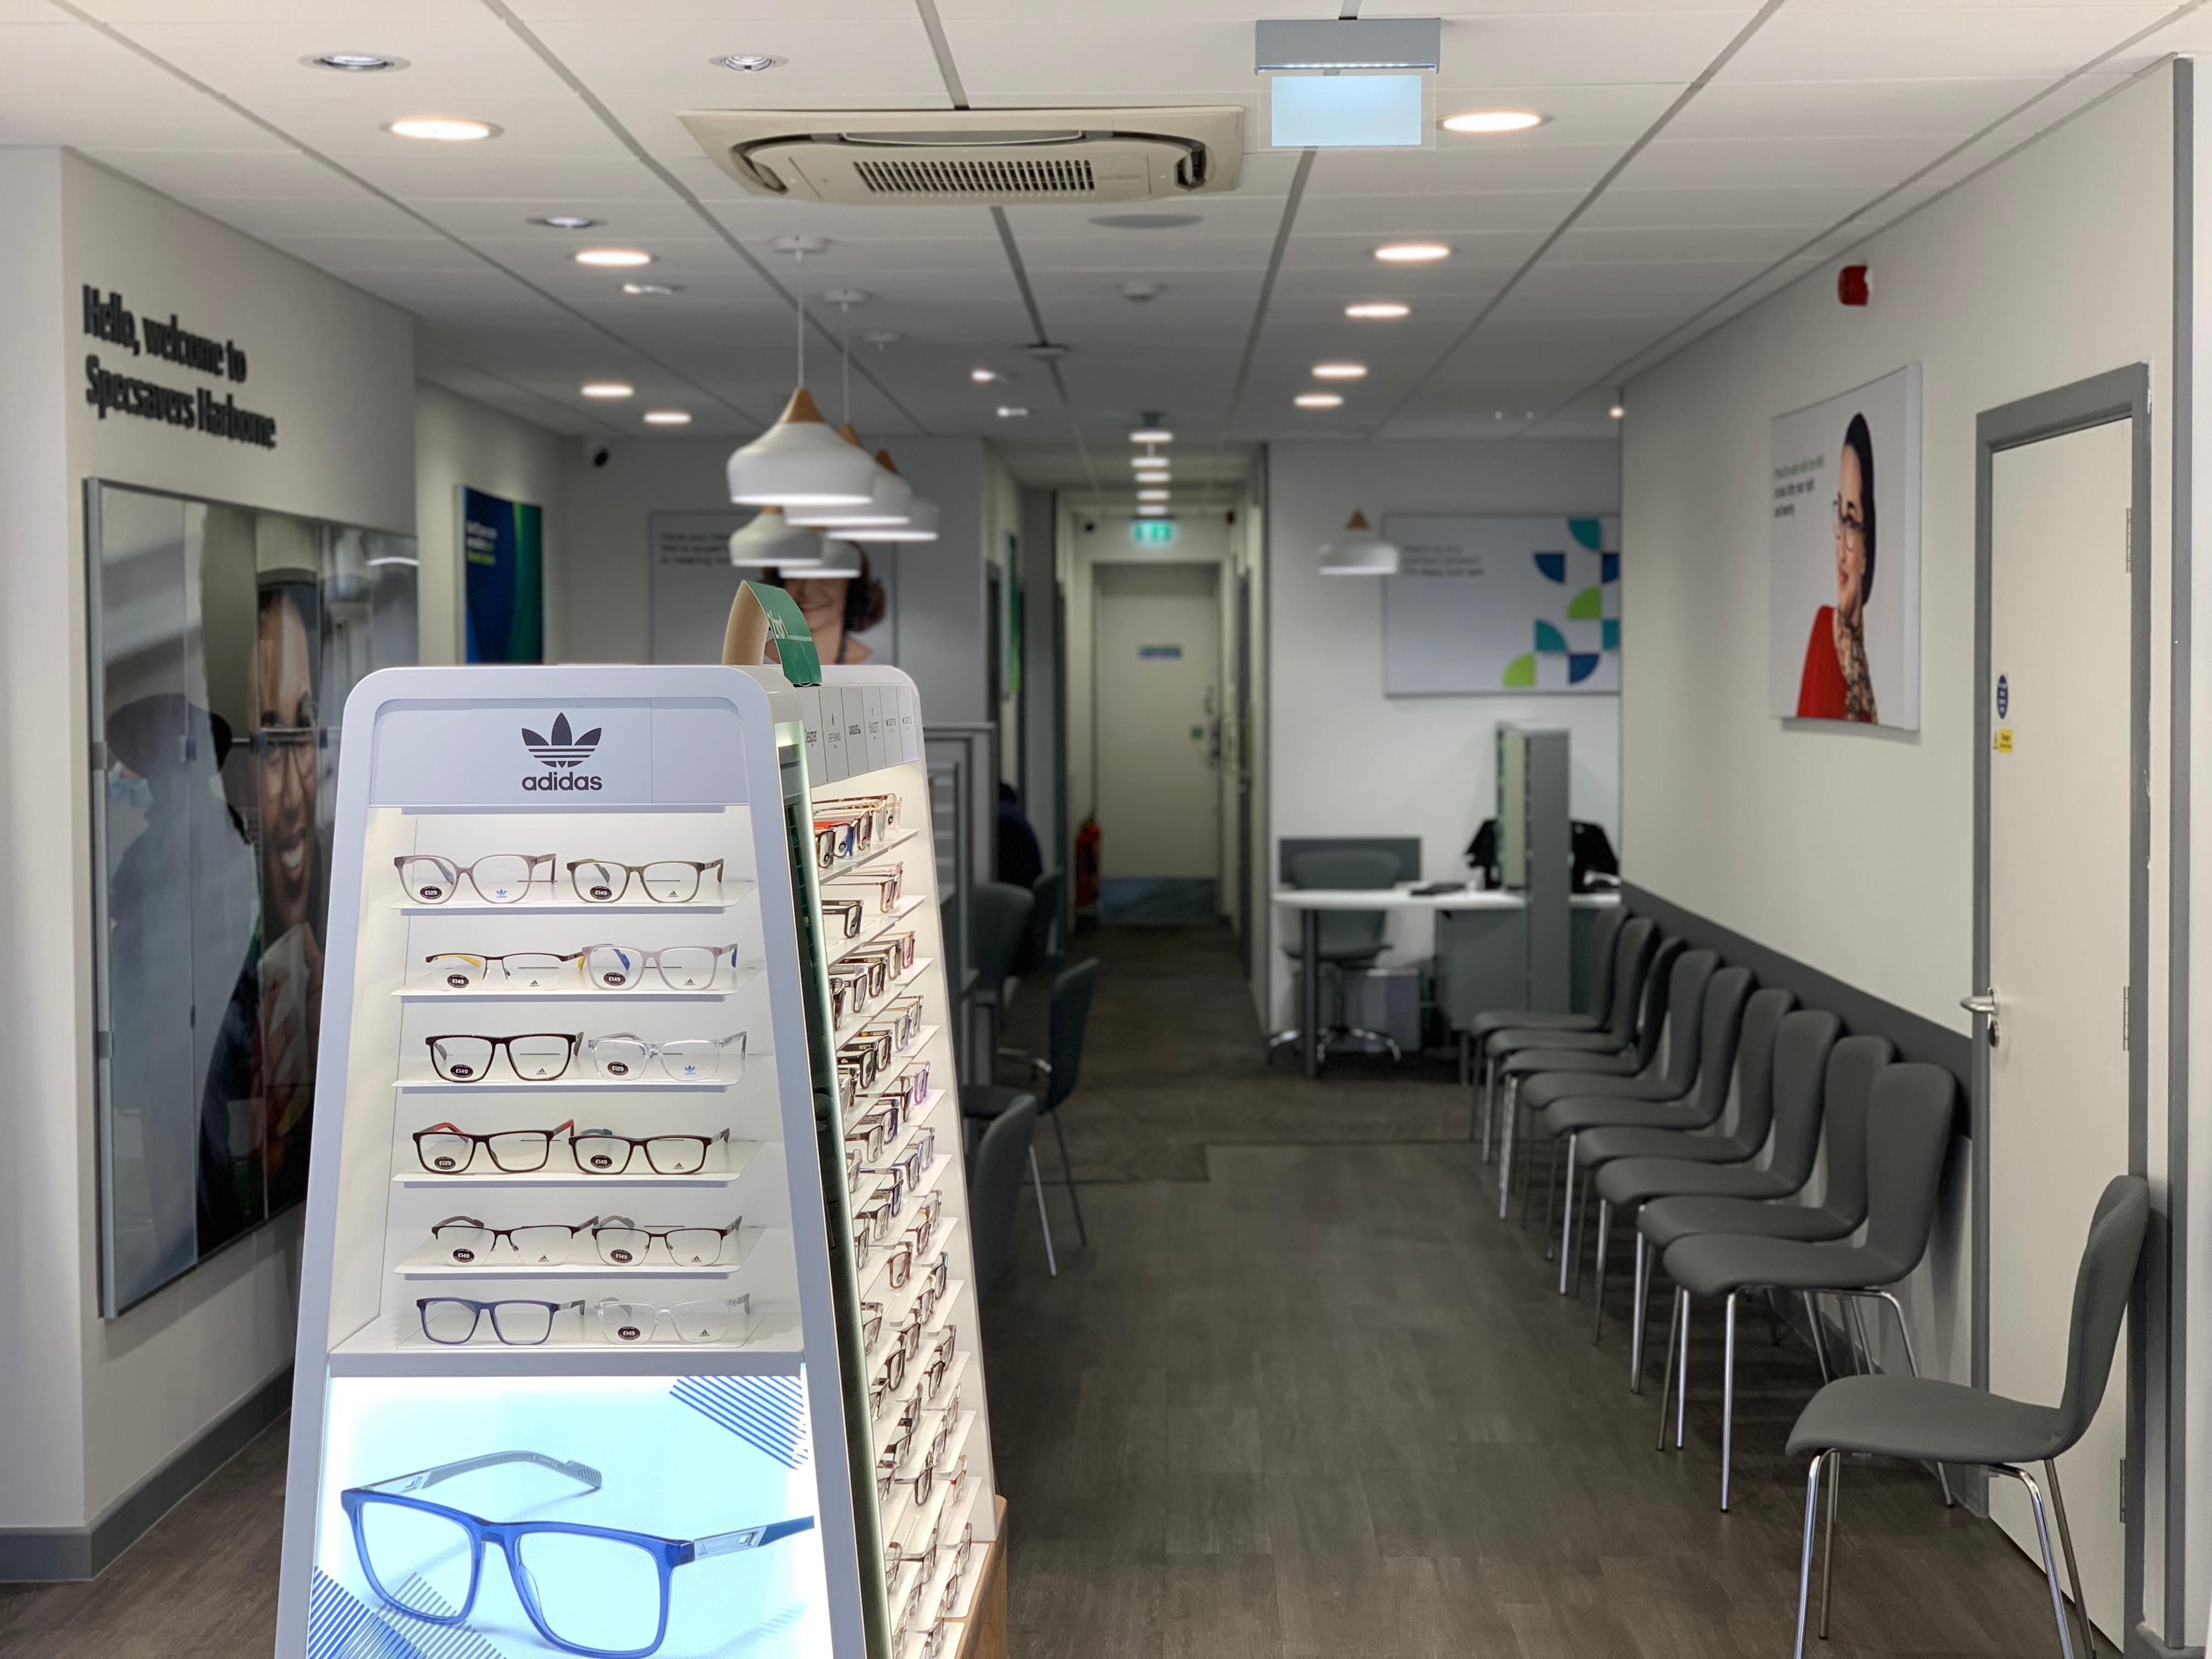 Images Specsavers Opticians and Audiologists - Harborne